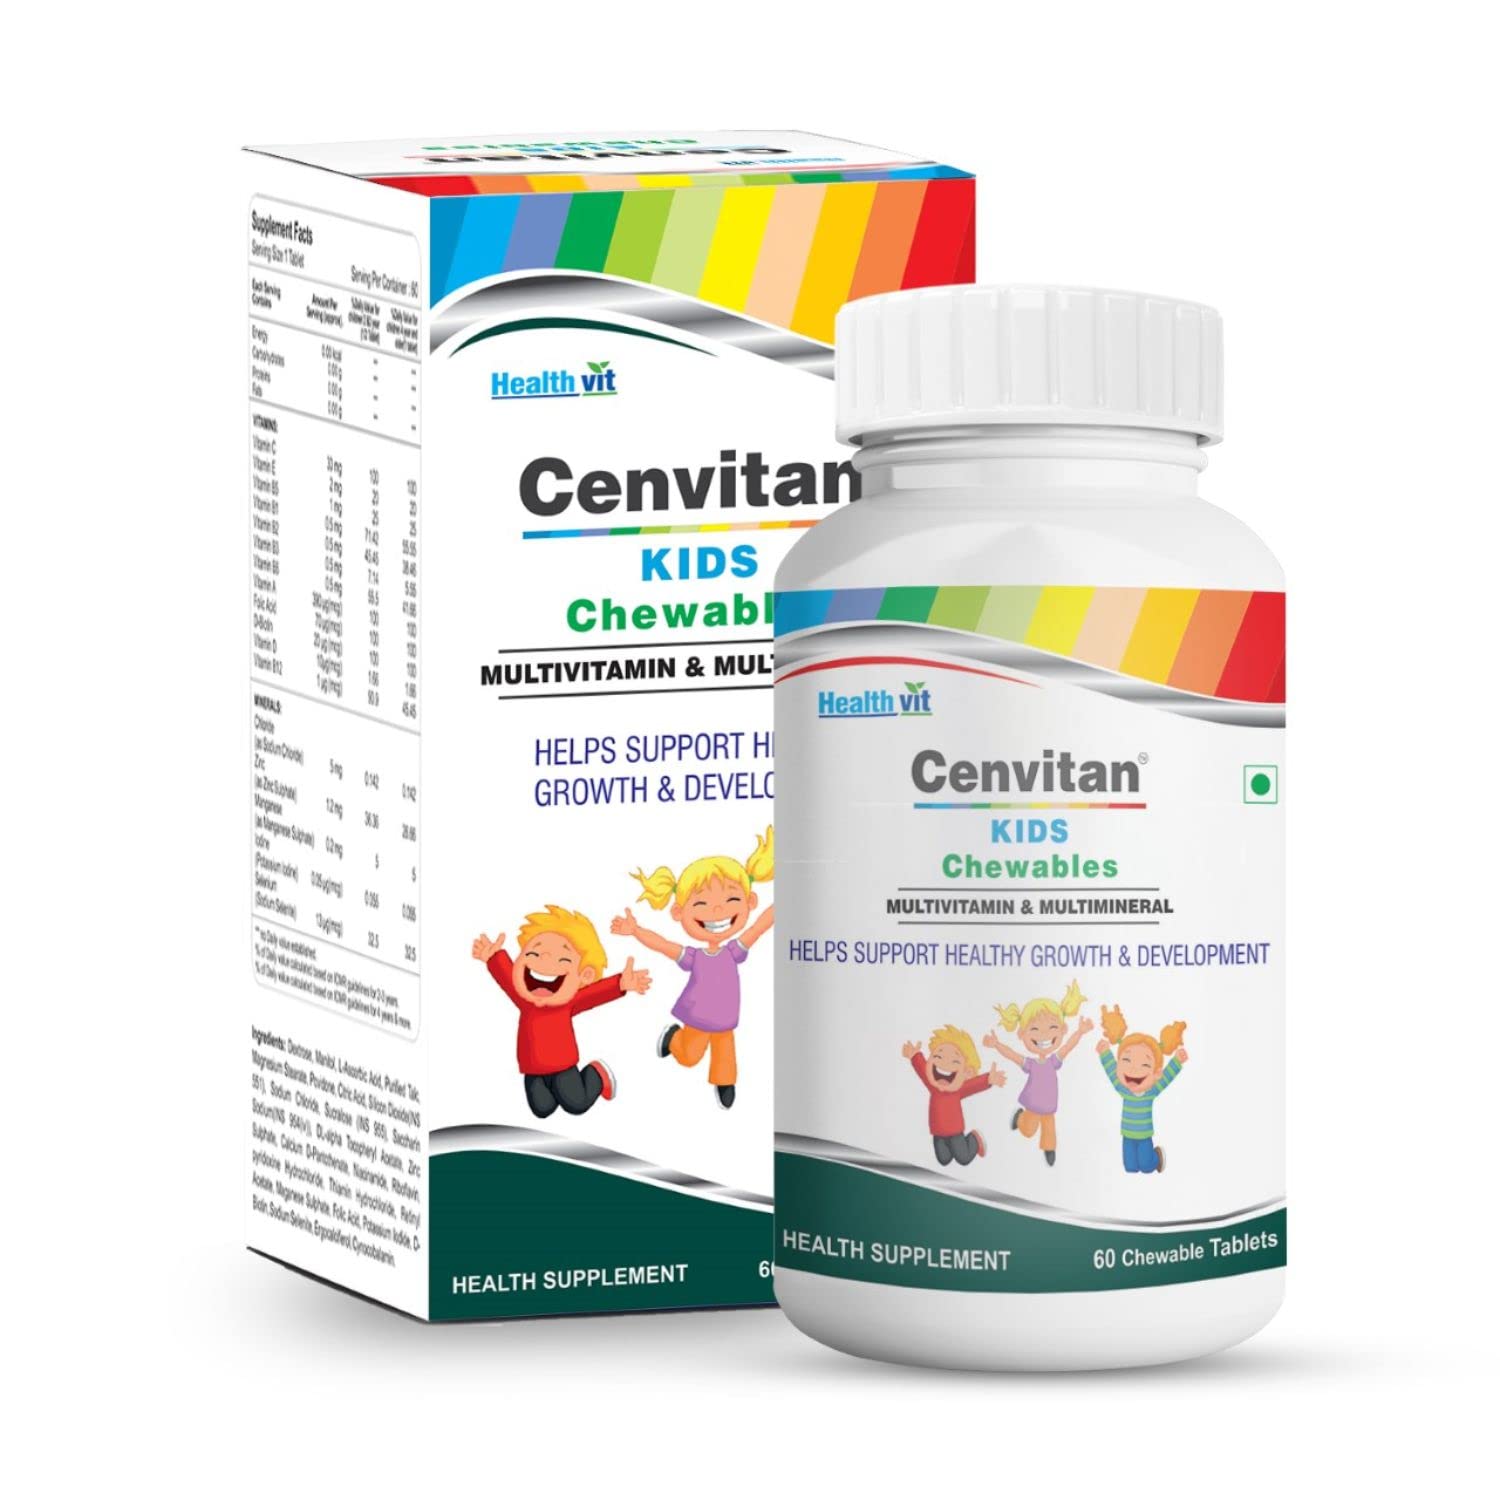 HealthVit Cenvitan Kids Multivitamin & Multimineral Chewable Tablets| Helps Support Healthy Growth & Development| Immunity Booster for Kid's Strength, Energy, Growth & Strong Bones – 60 Tablets